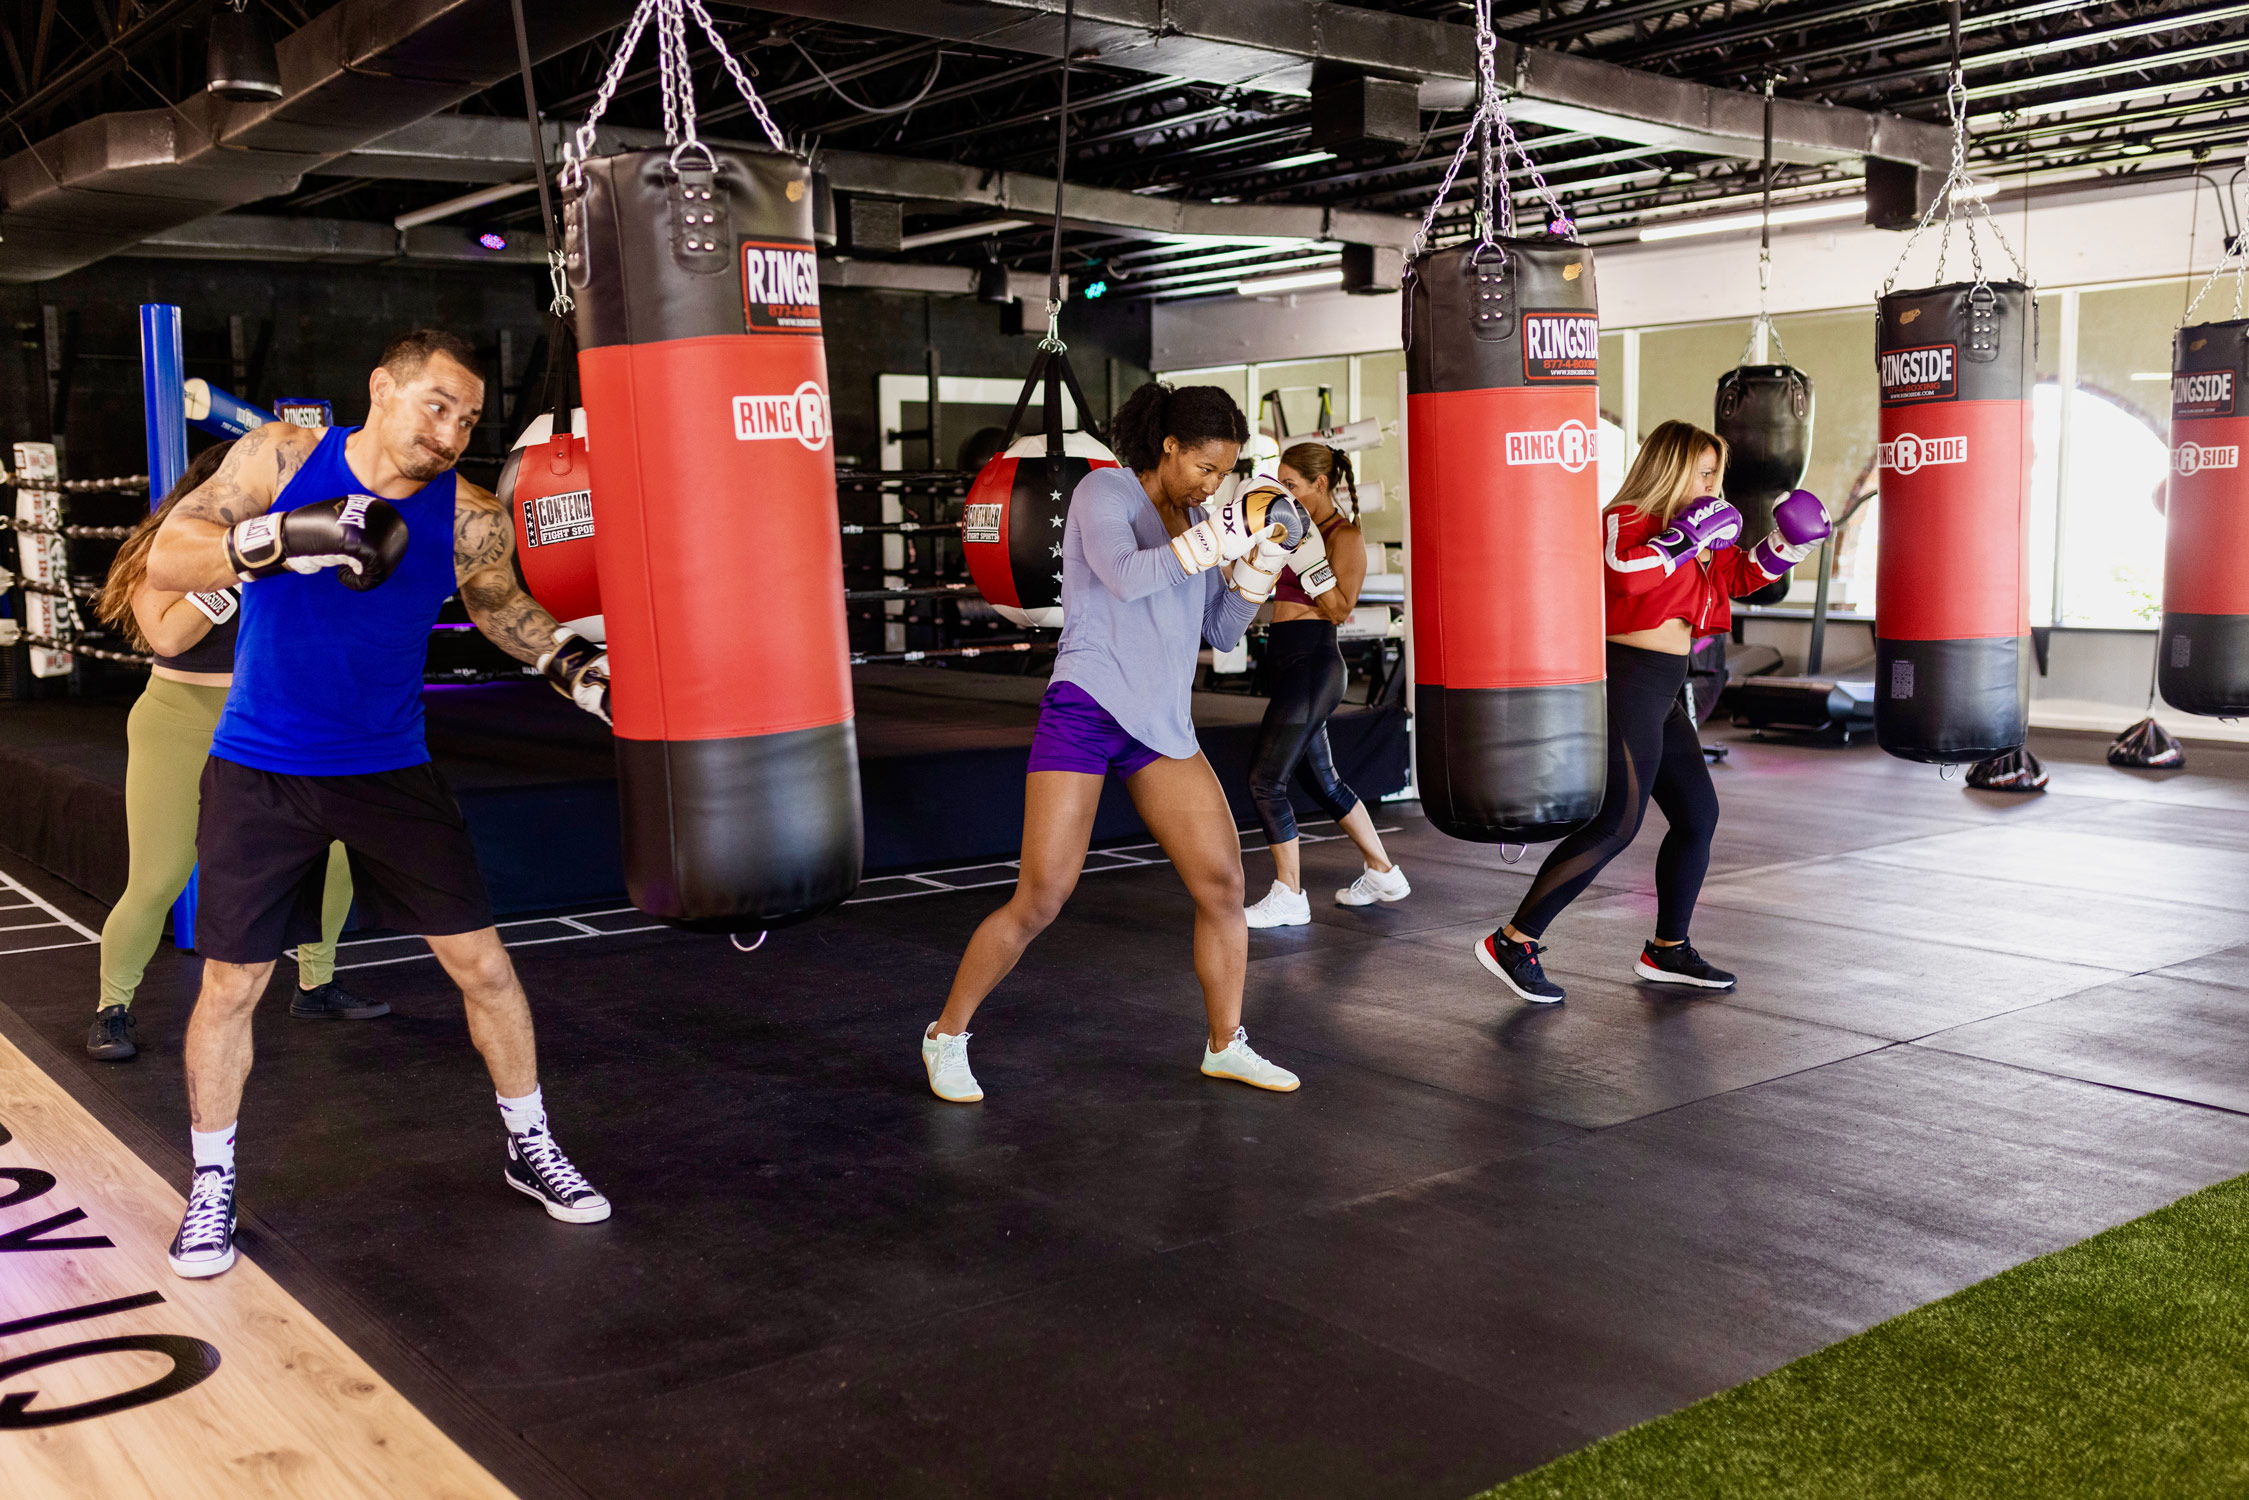 Boxing gym members punching bags in front of a boxing ring